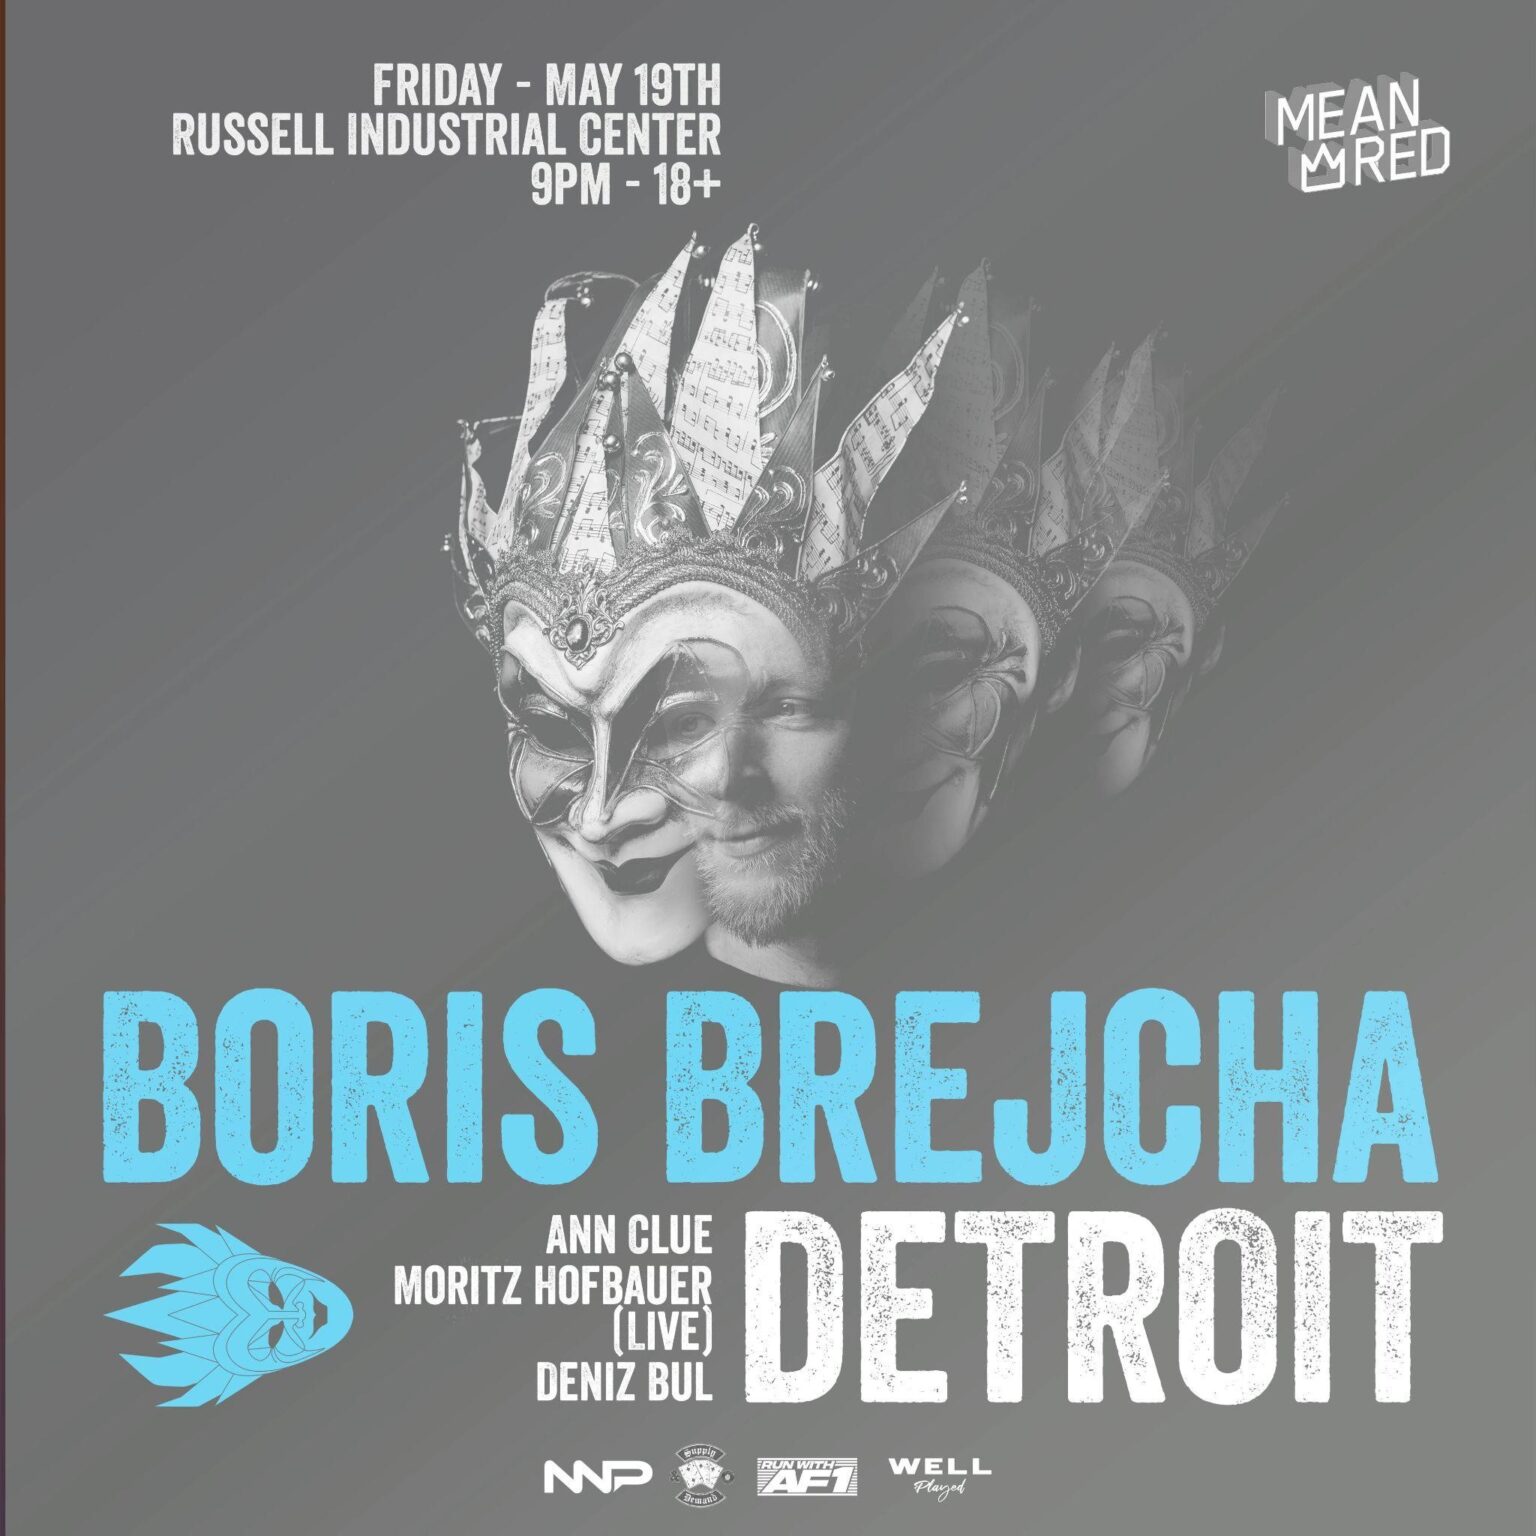 Boris Brejcha to Make Detroit Debut on OpenAir Stage at Russell